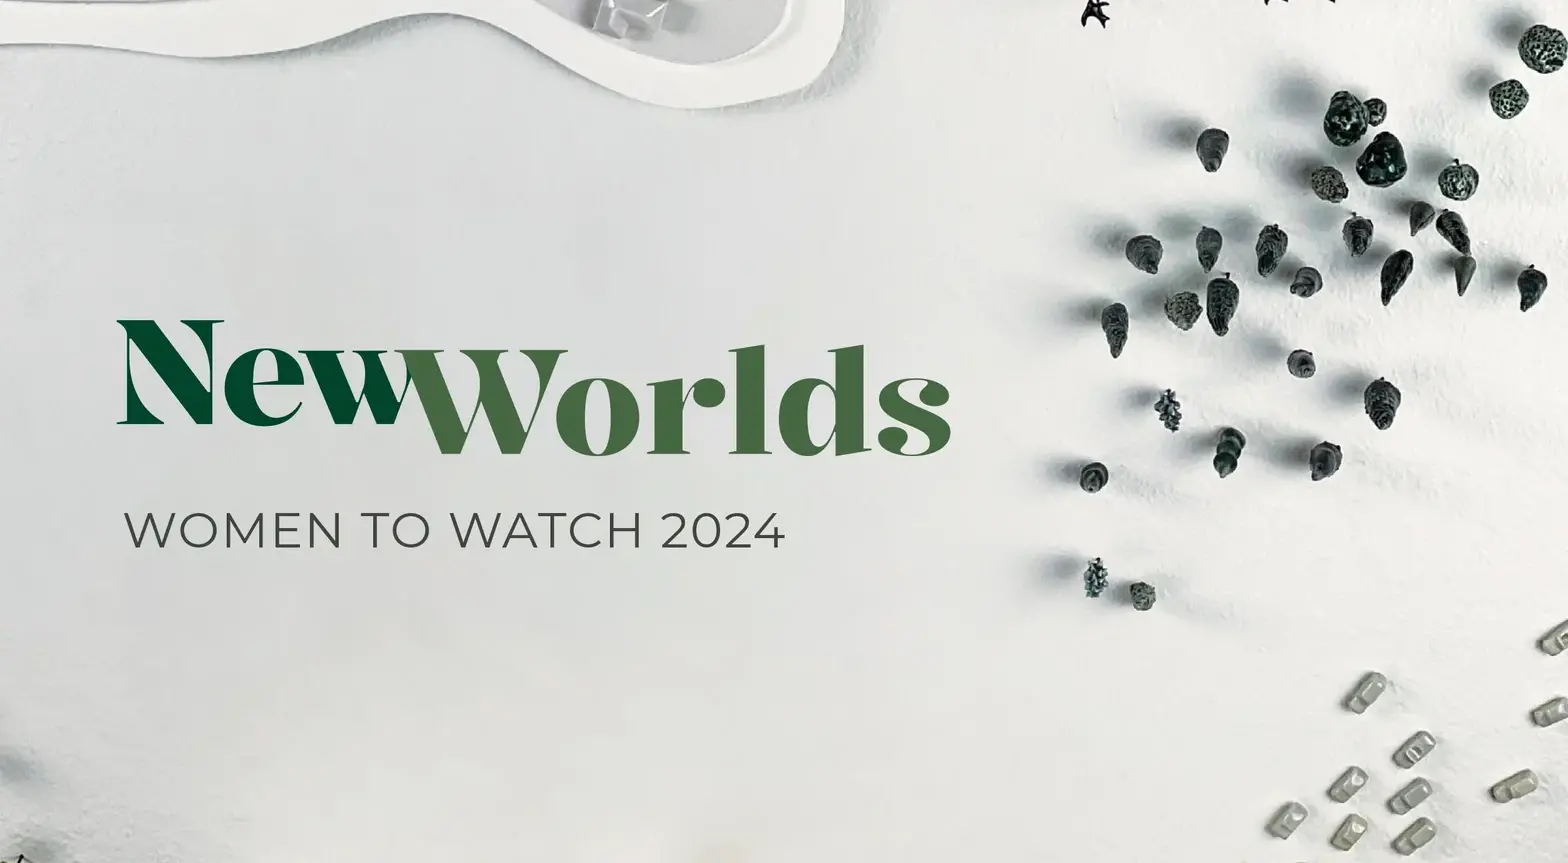 An exhibition catalog with the title "New Worlds: Women to Watch 2024" written in green across a white background filled with ceramic trees, birds, cars, and small buildings.